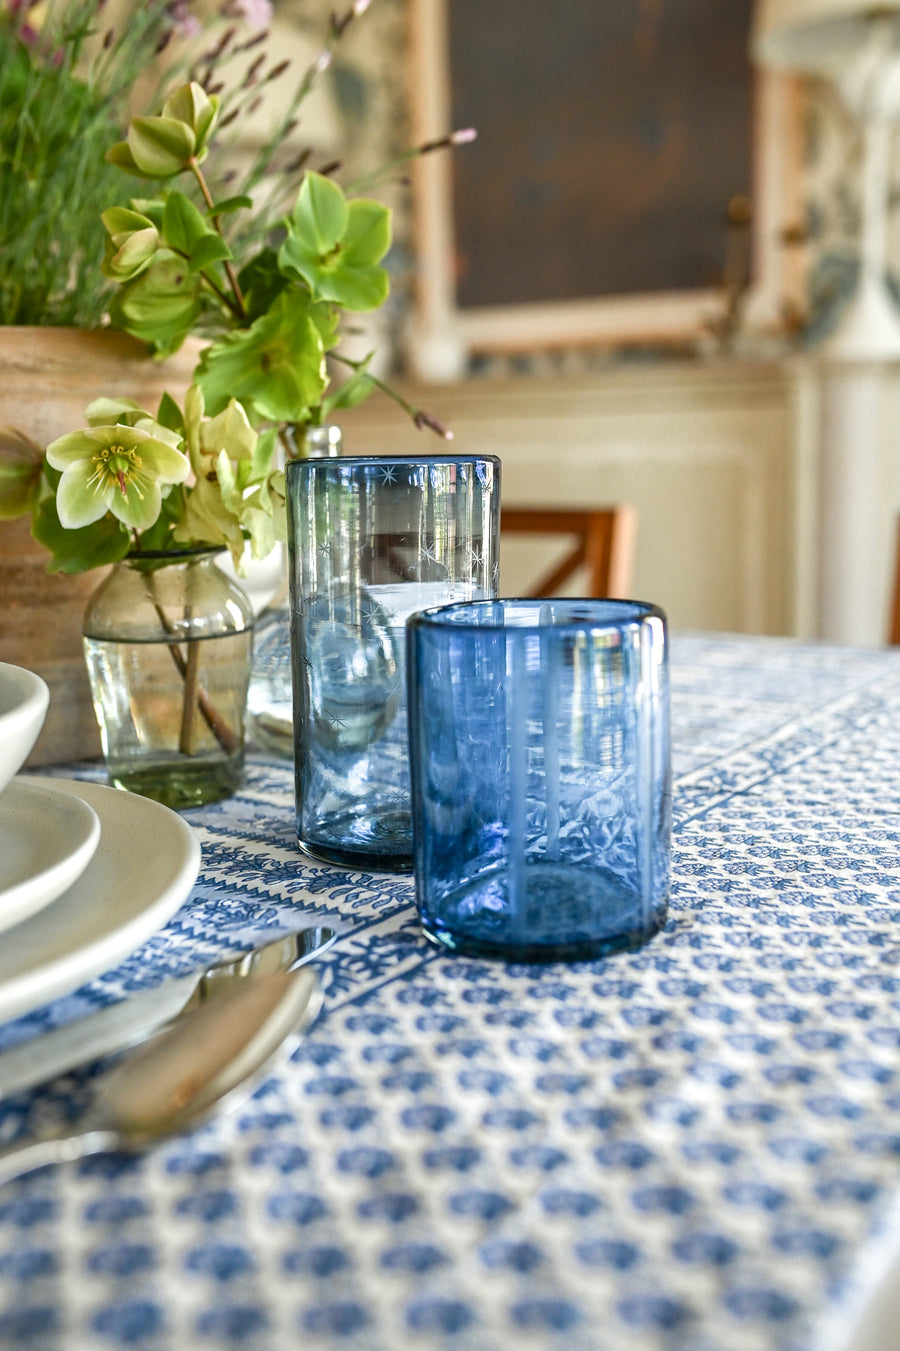 Starry Night Water Glass in Blue